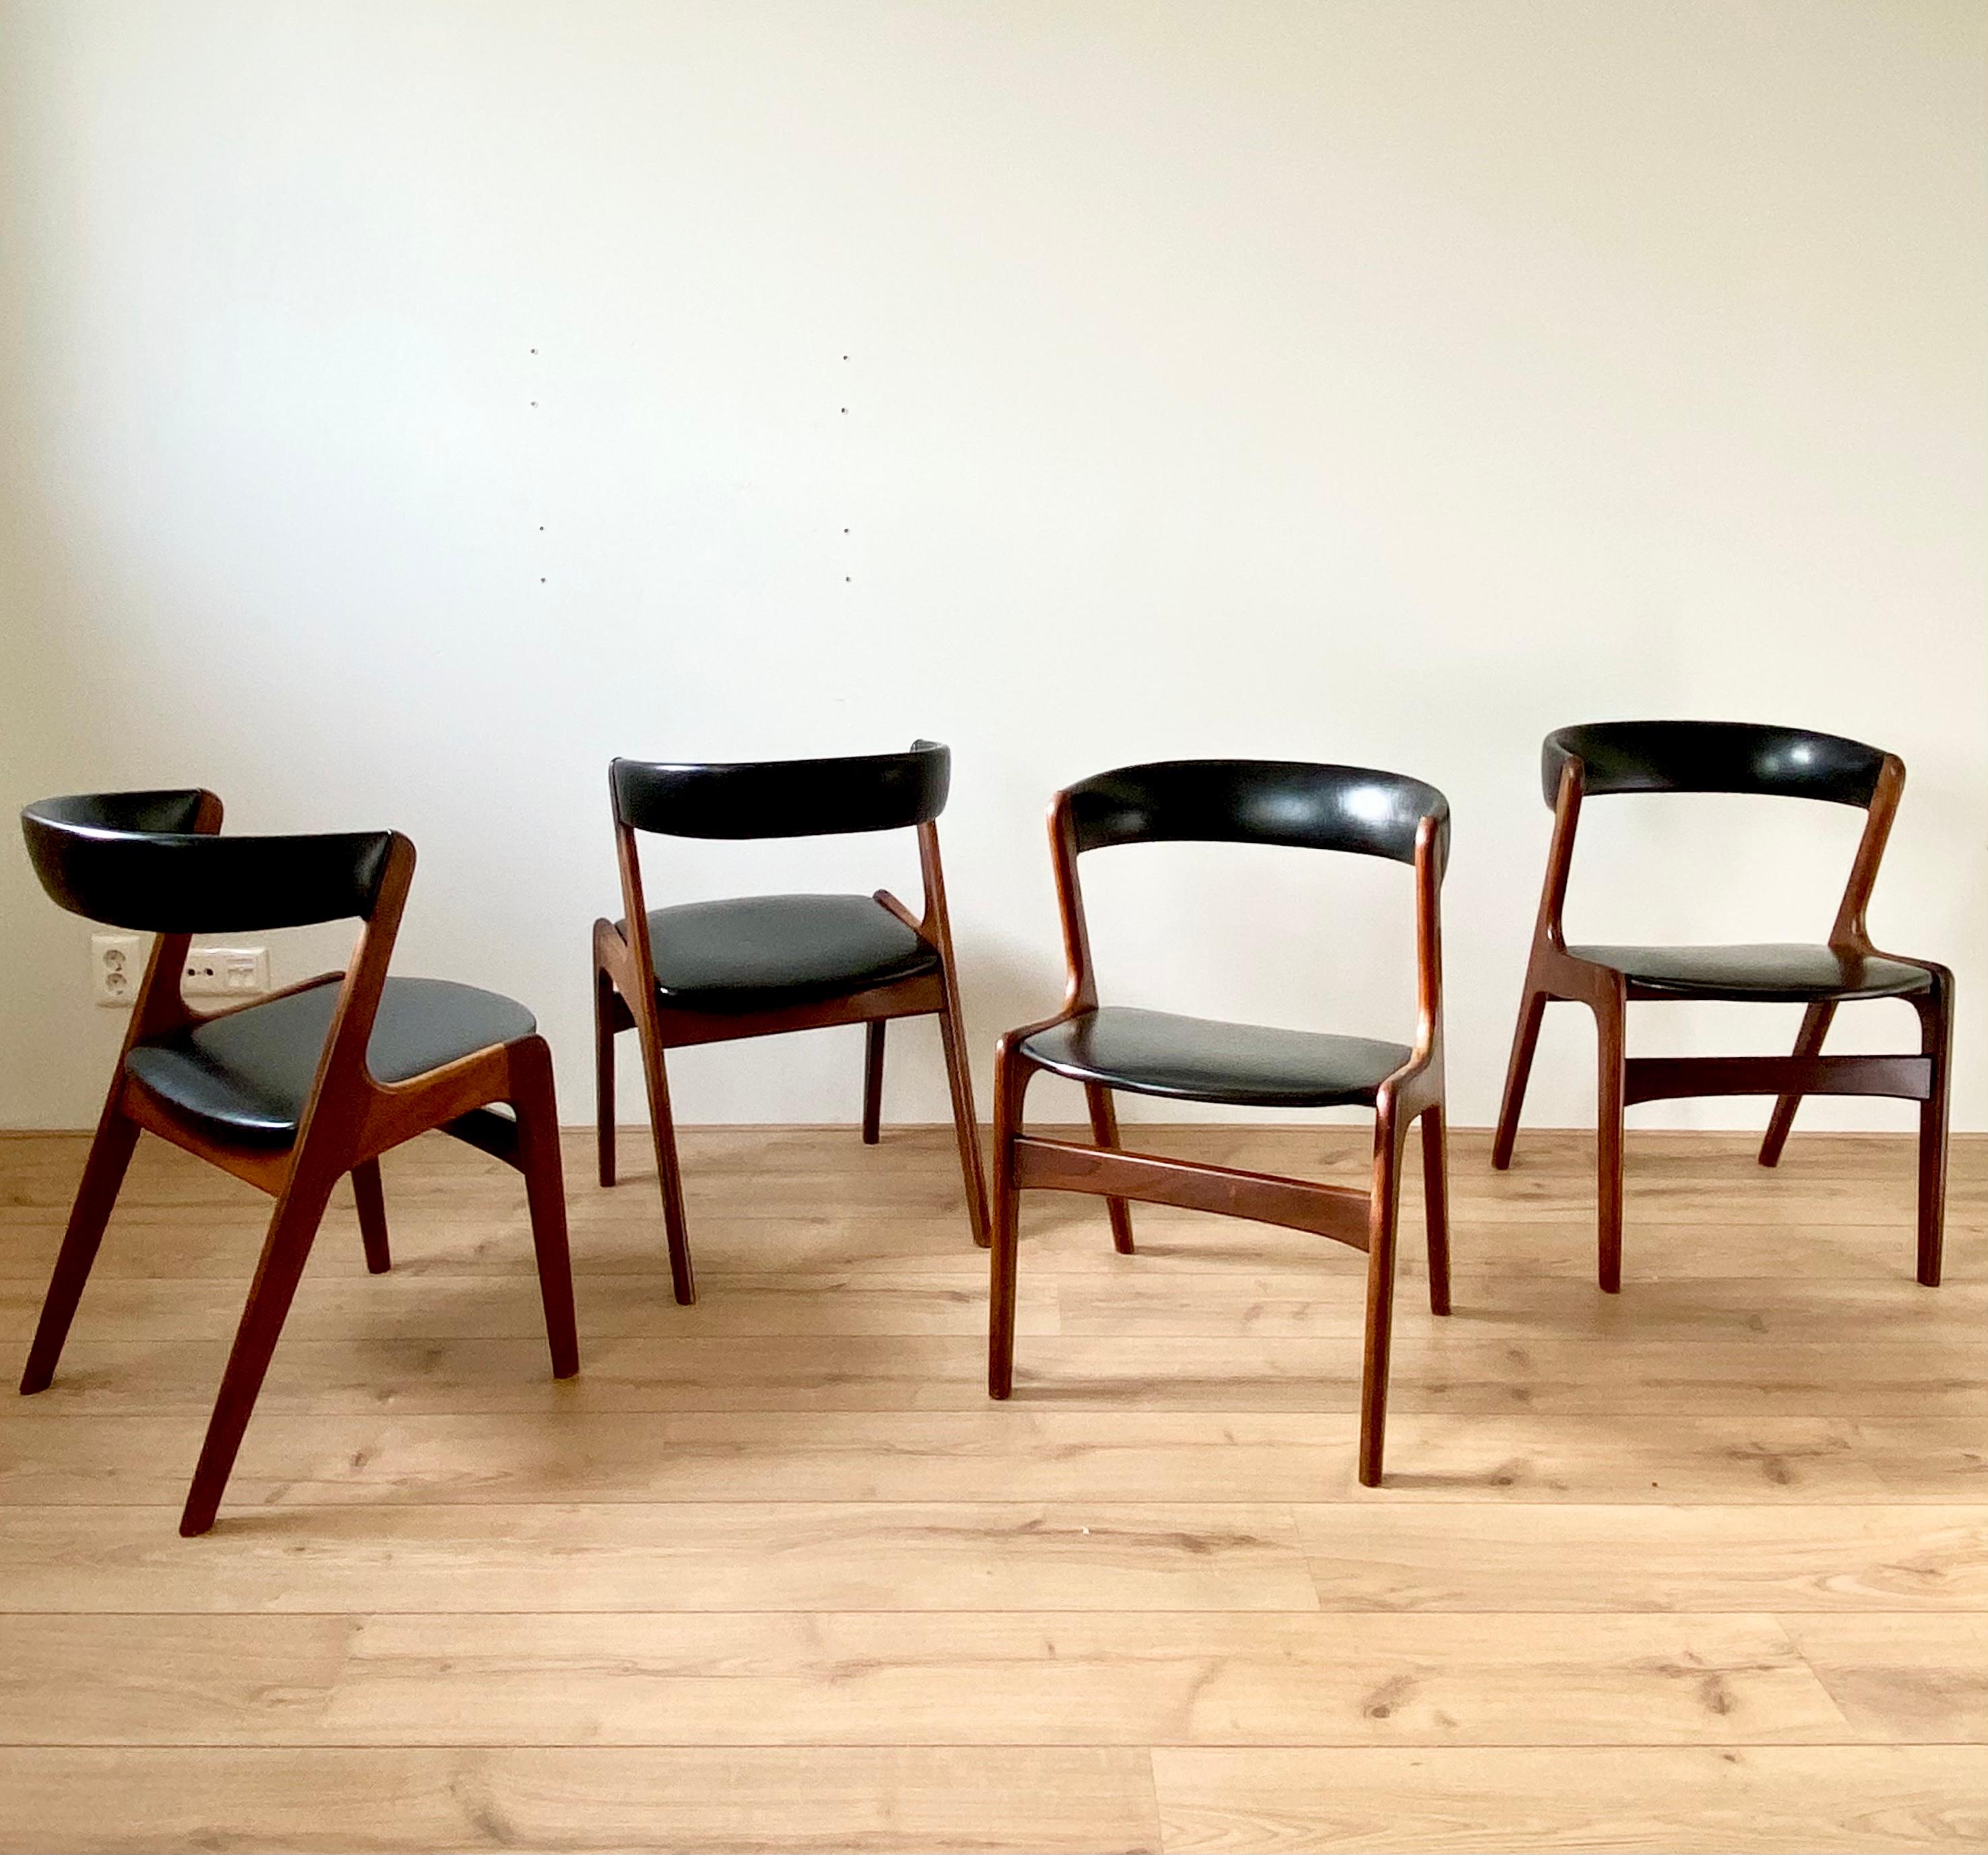 Midcentury Danish Design Dining Chairs By T.H. Harlev for Farstrup Mobler. In Good Condition For Sale In Schagen, NL